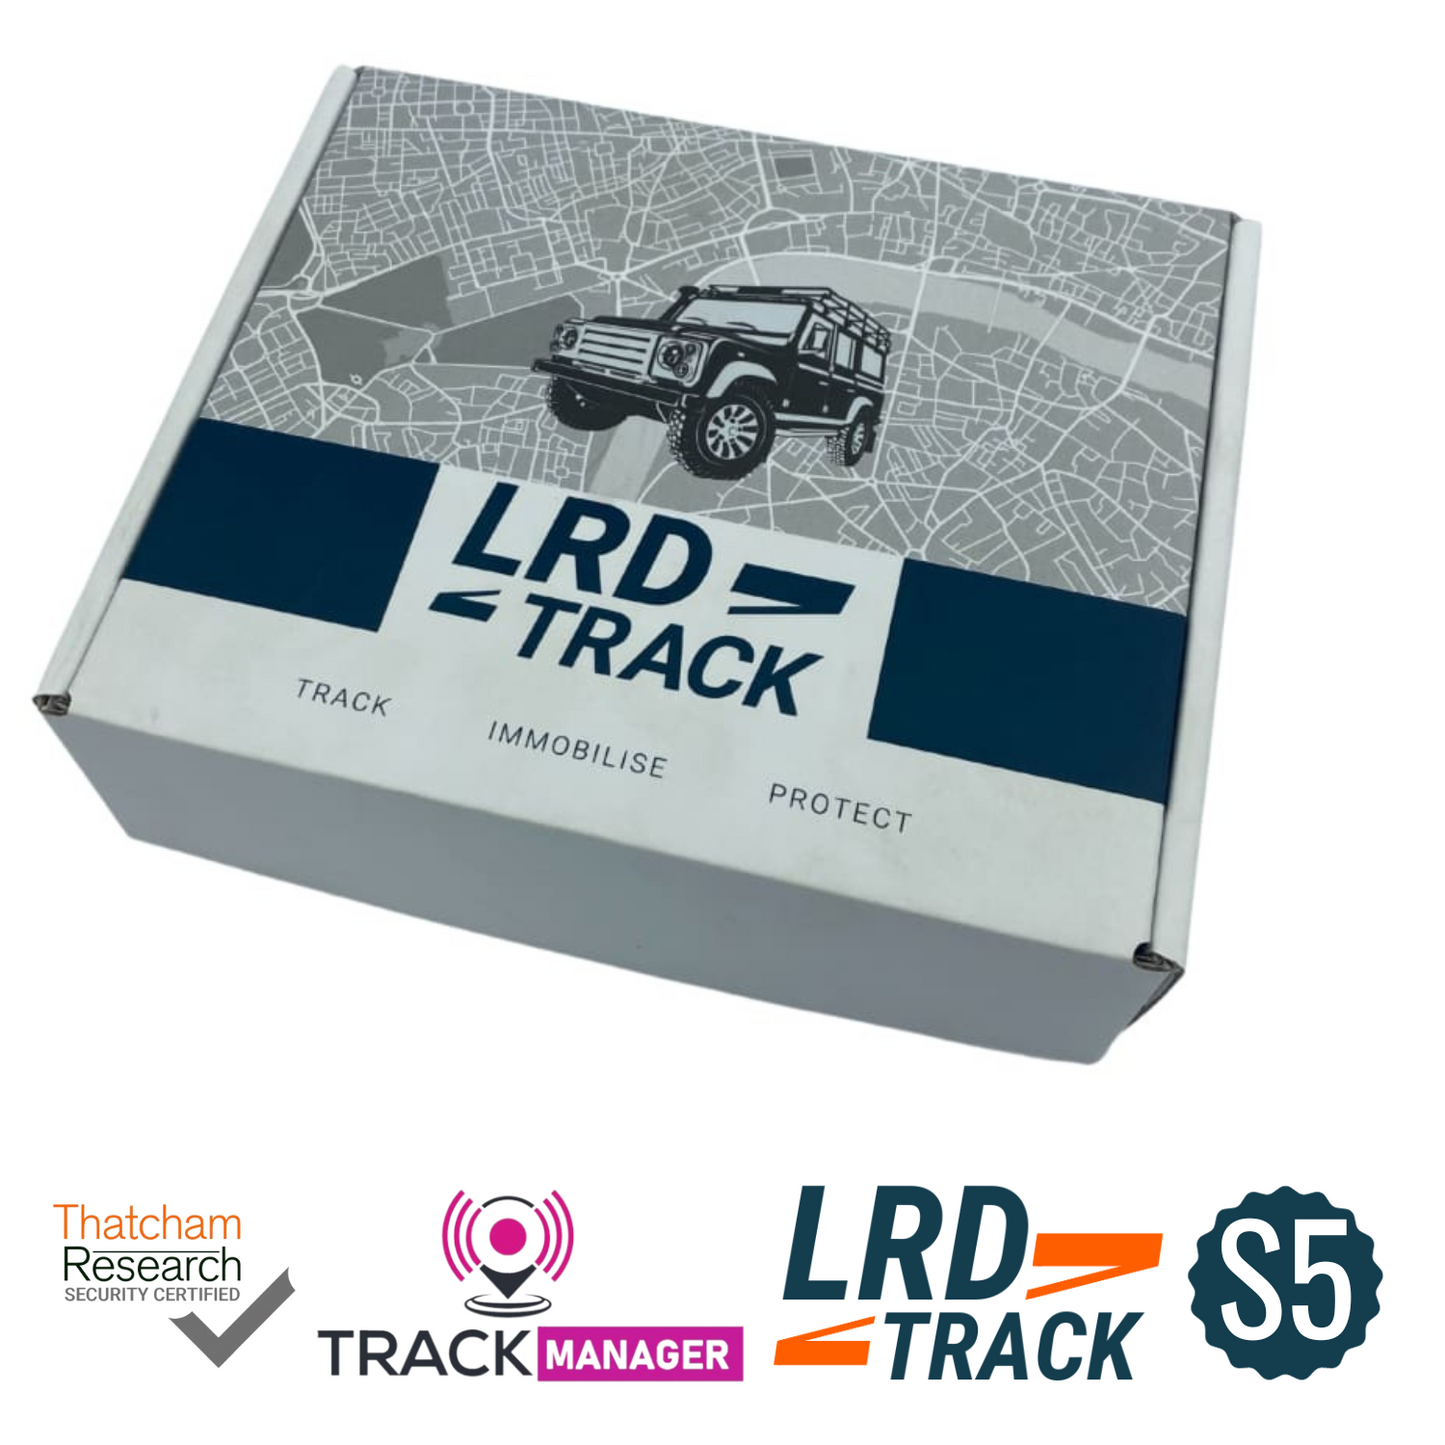 ULTRA Track Manager - S5 plus - Classic Defender Tracker and Immobiliser - LRD Track